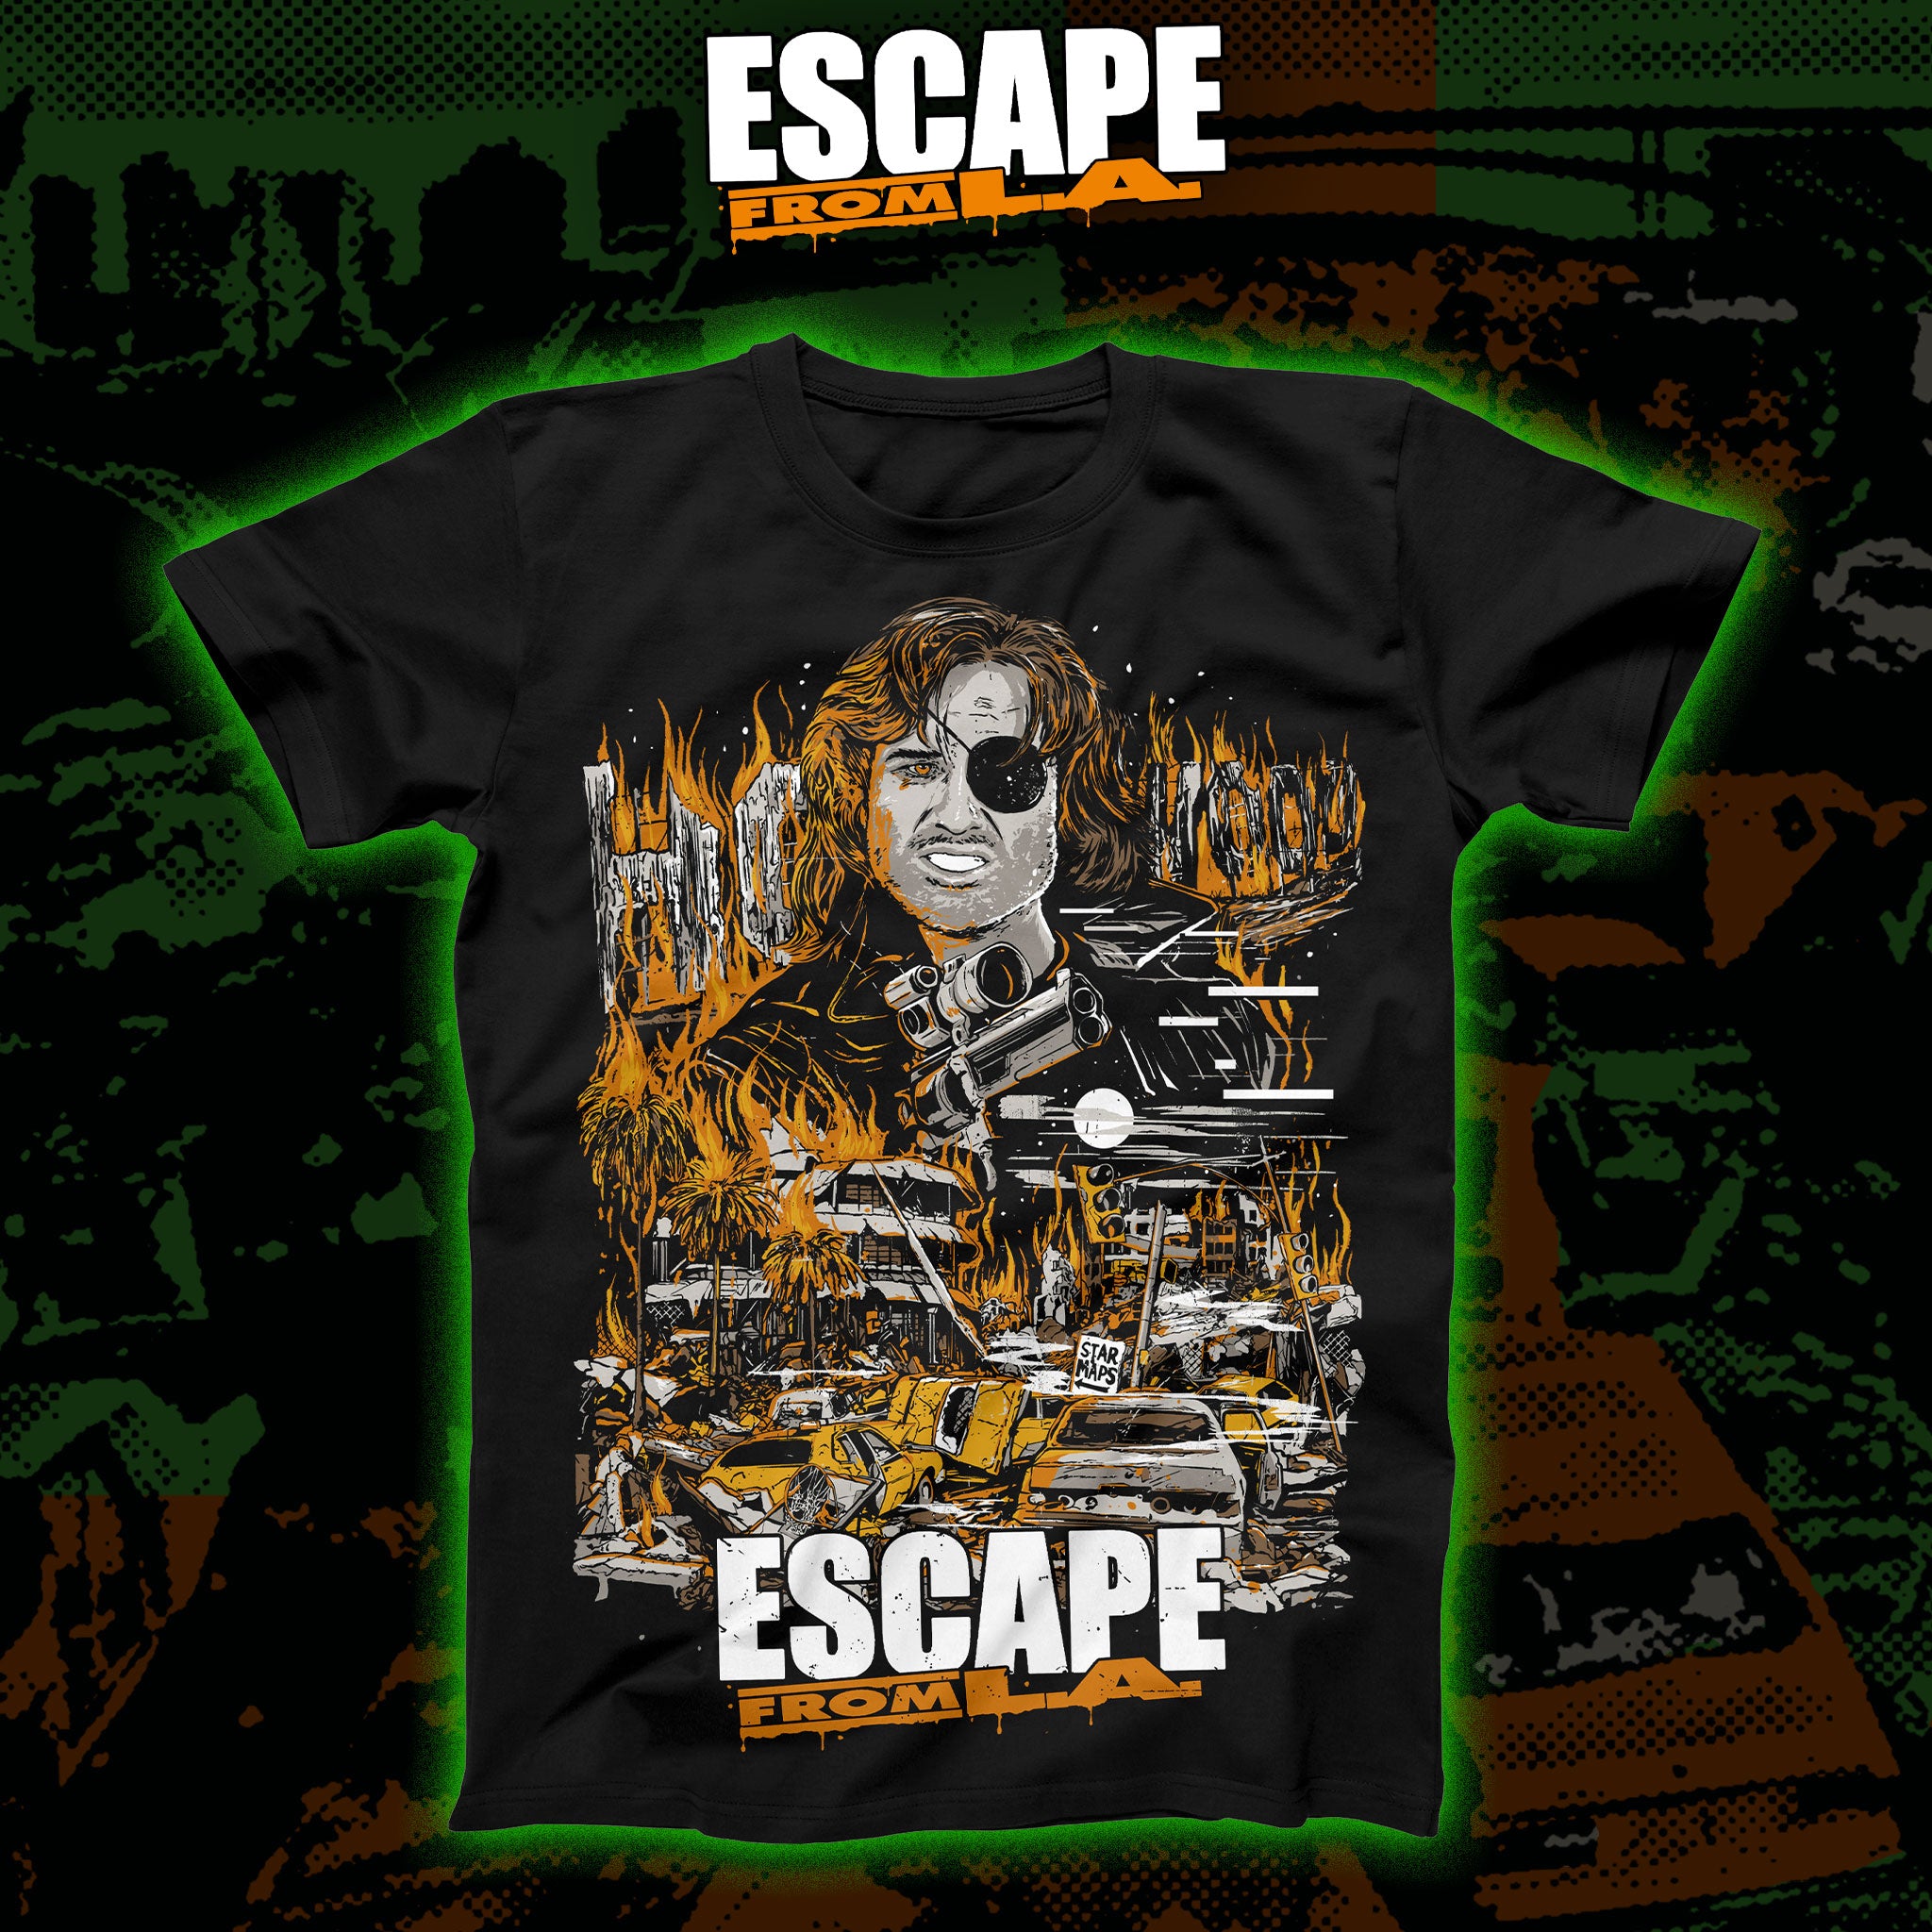 Escape from L.A. "Land of the Free" Regular tee